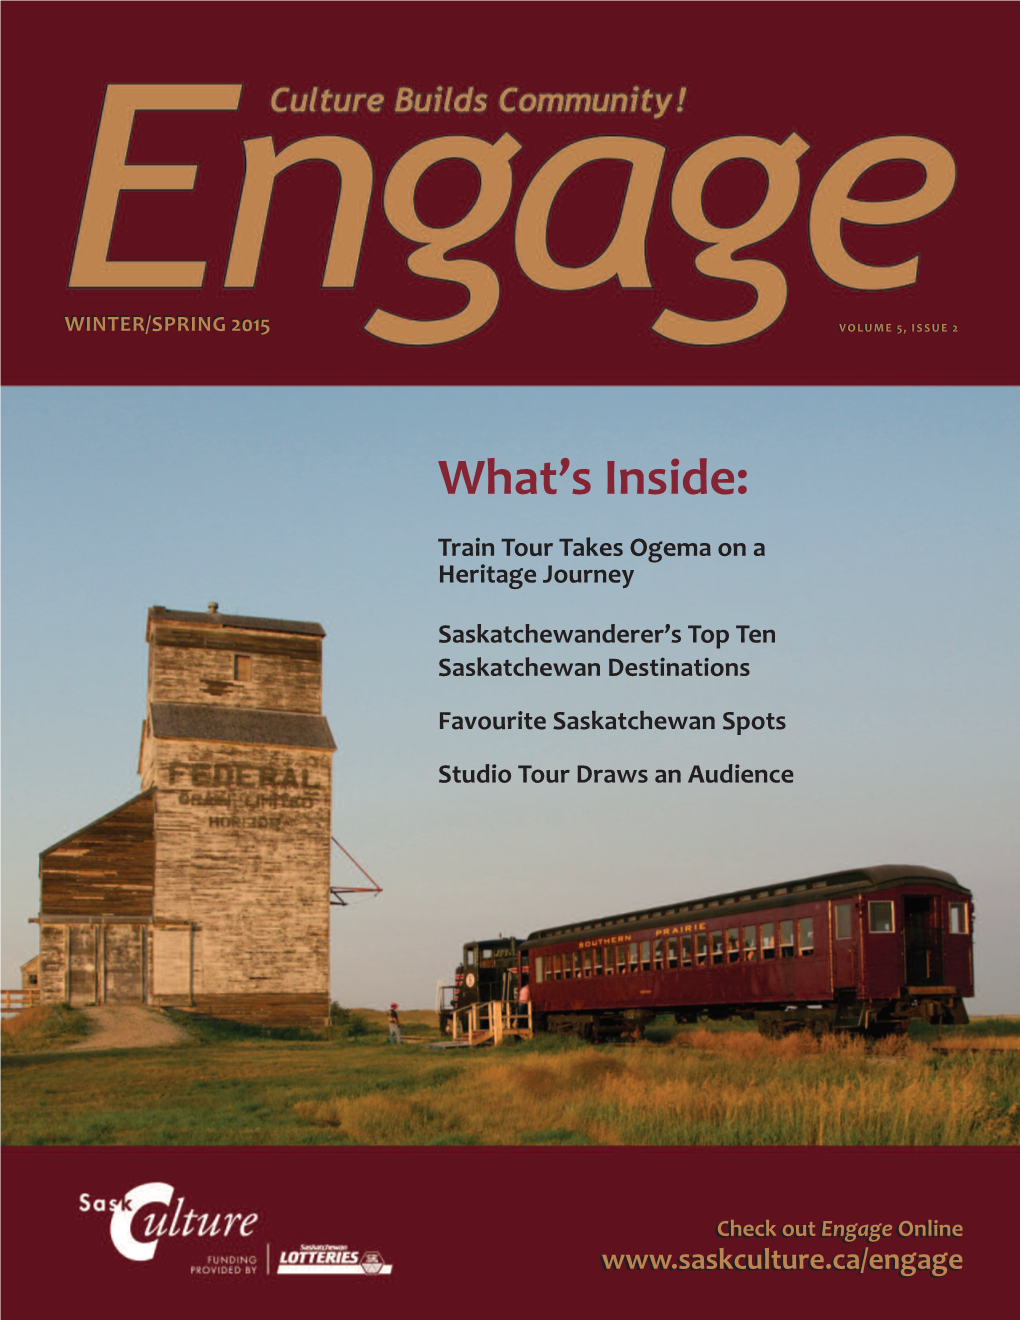 Engage - Volume 5 Issue 2 Winter - Spring 2015.Pdf